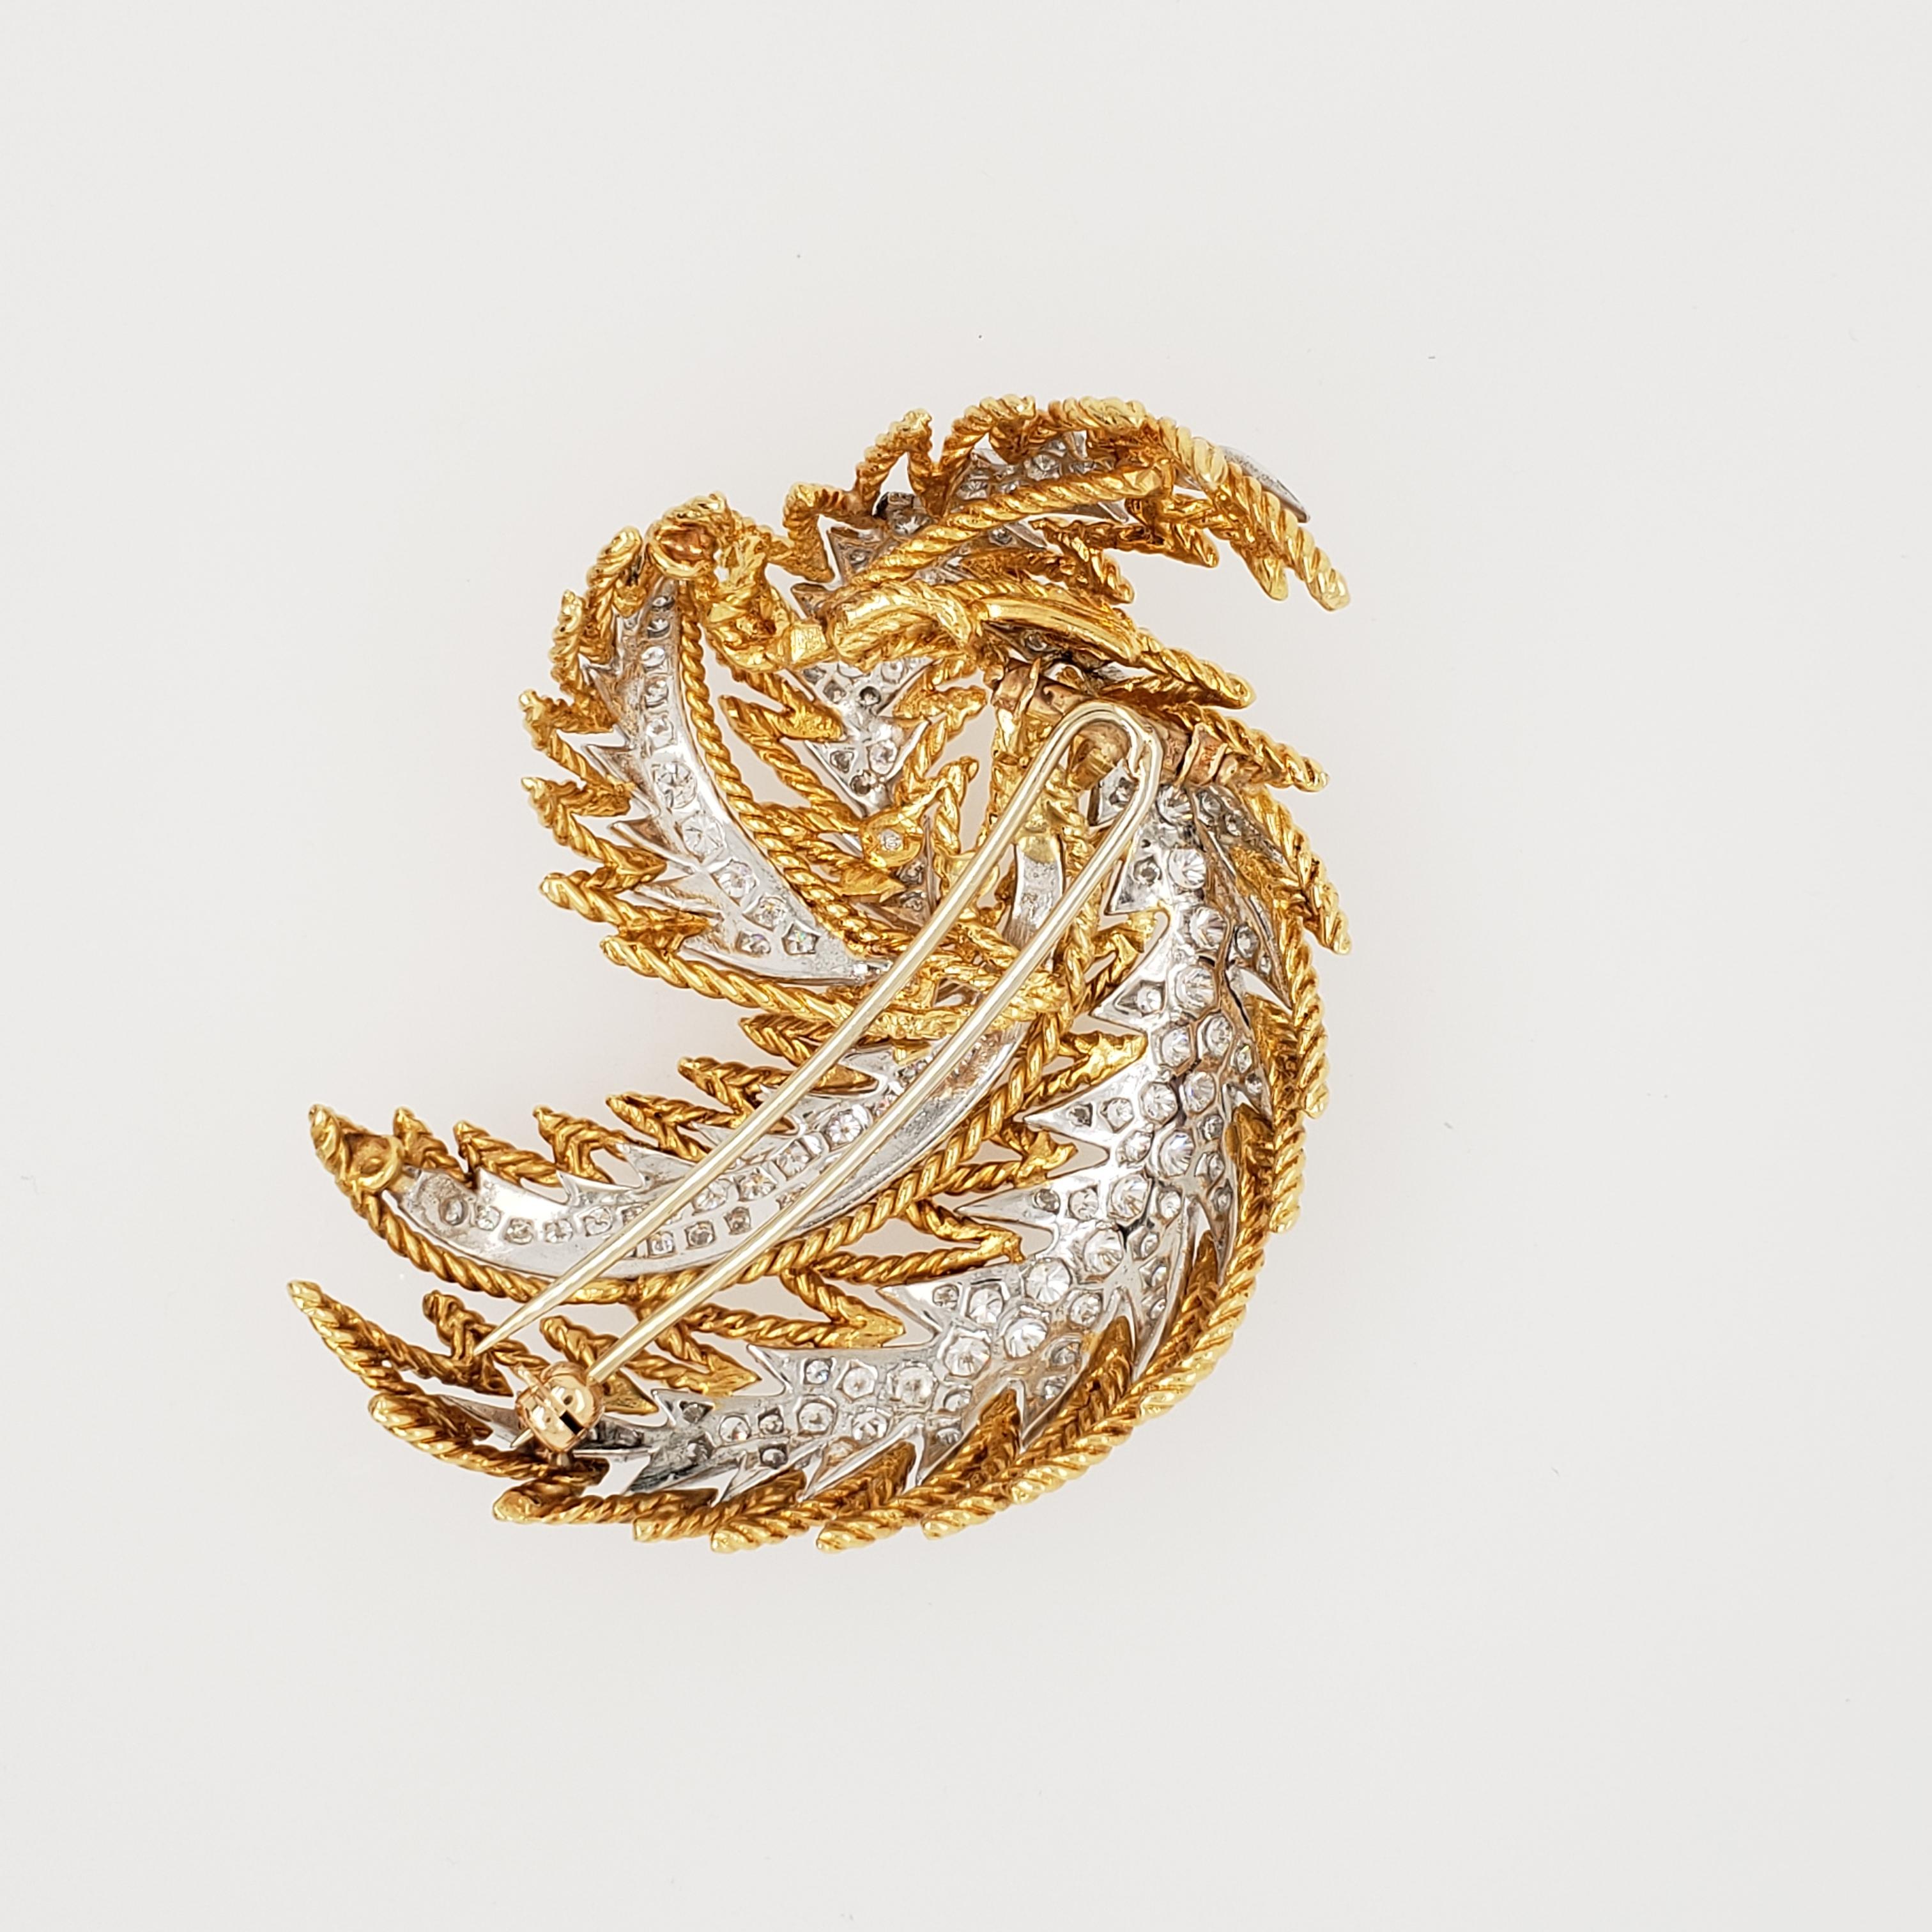 18kt Yellow Gold & Platinum Diamond Feather Brooch.  The diamonds have a total carat weight of aprx. 3.5 ct. A beautiful brooch with stunning delicate design. 